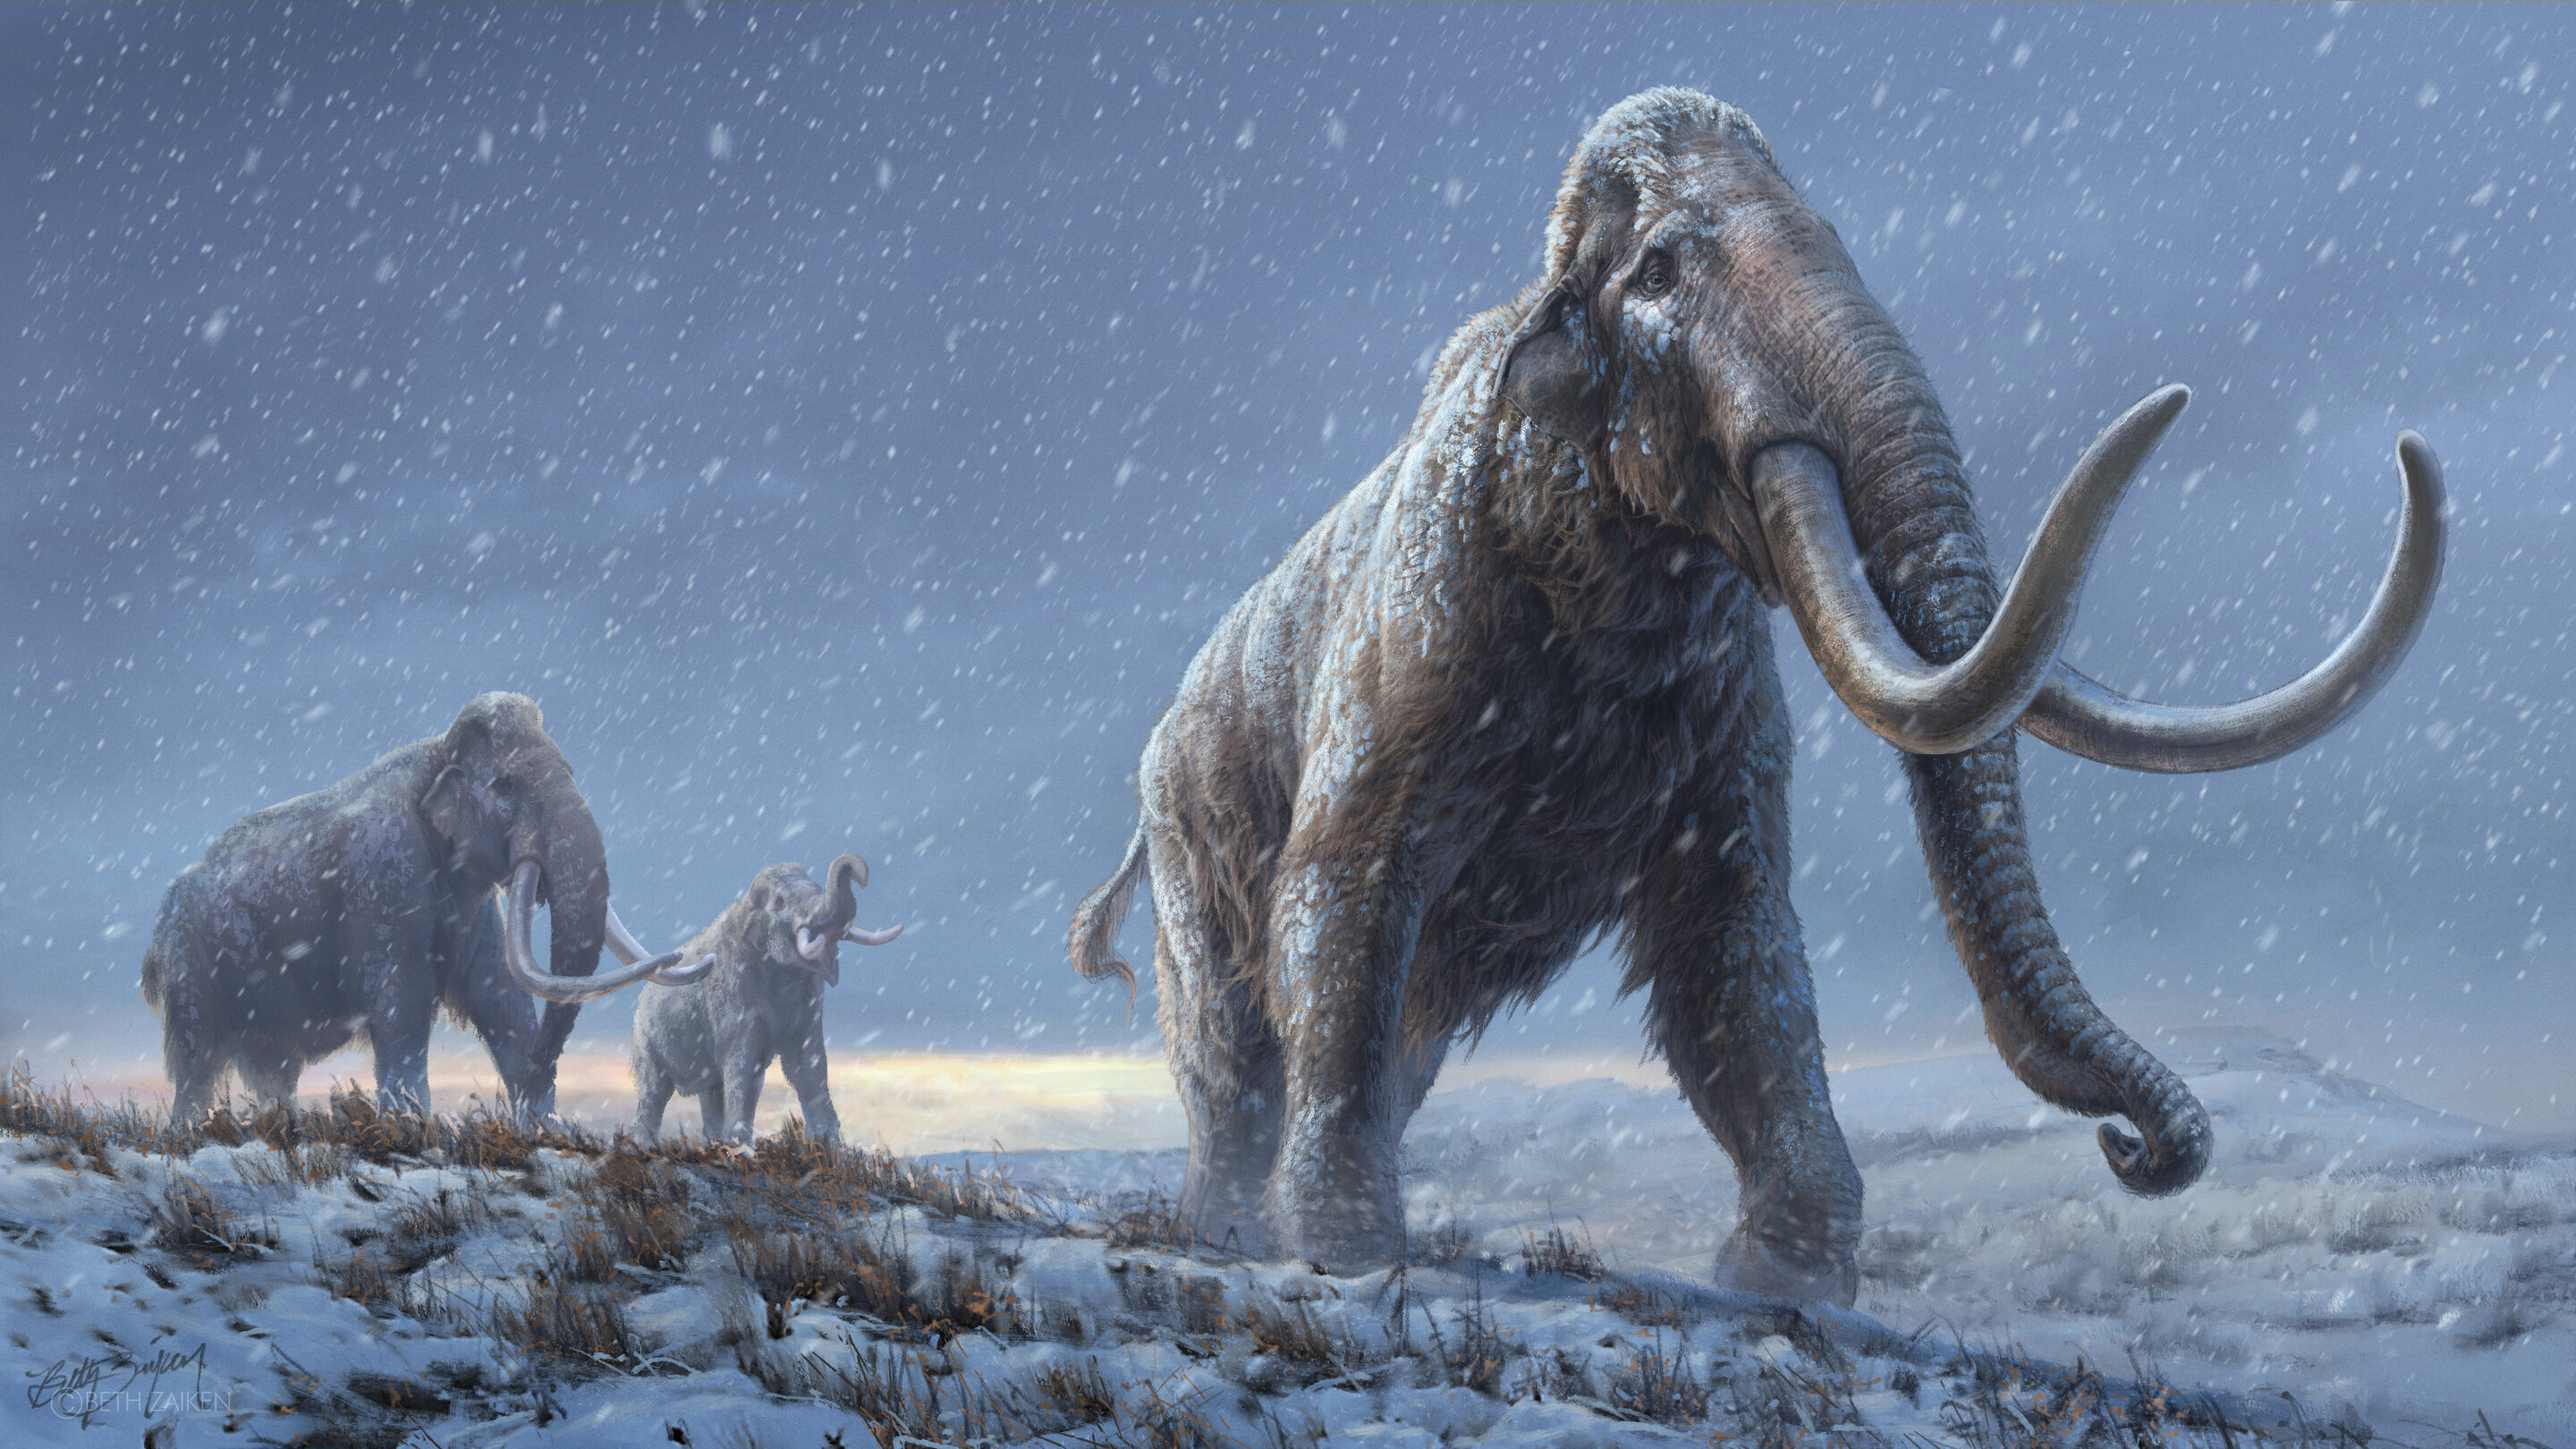 World's oldest DNA sequenced from million-year-old mammoths